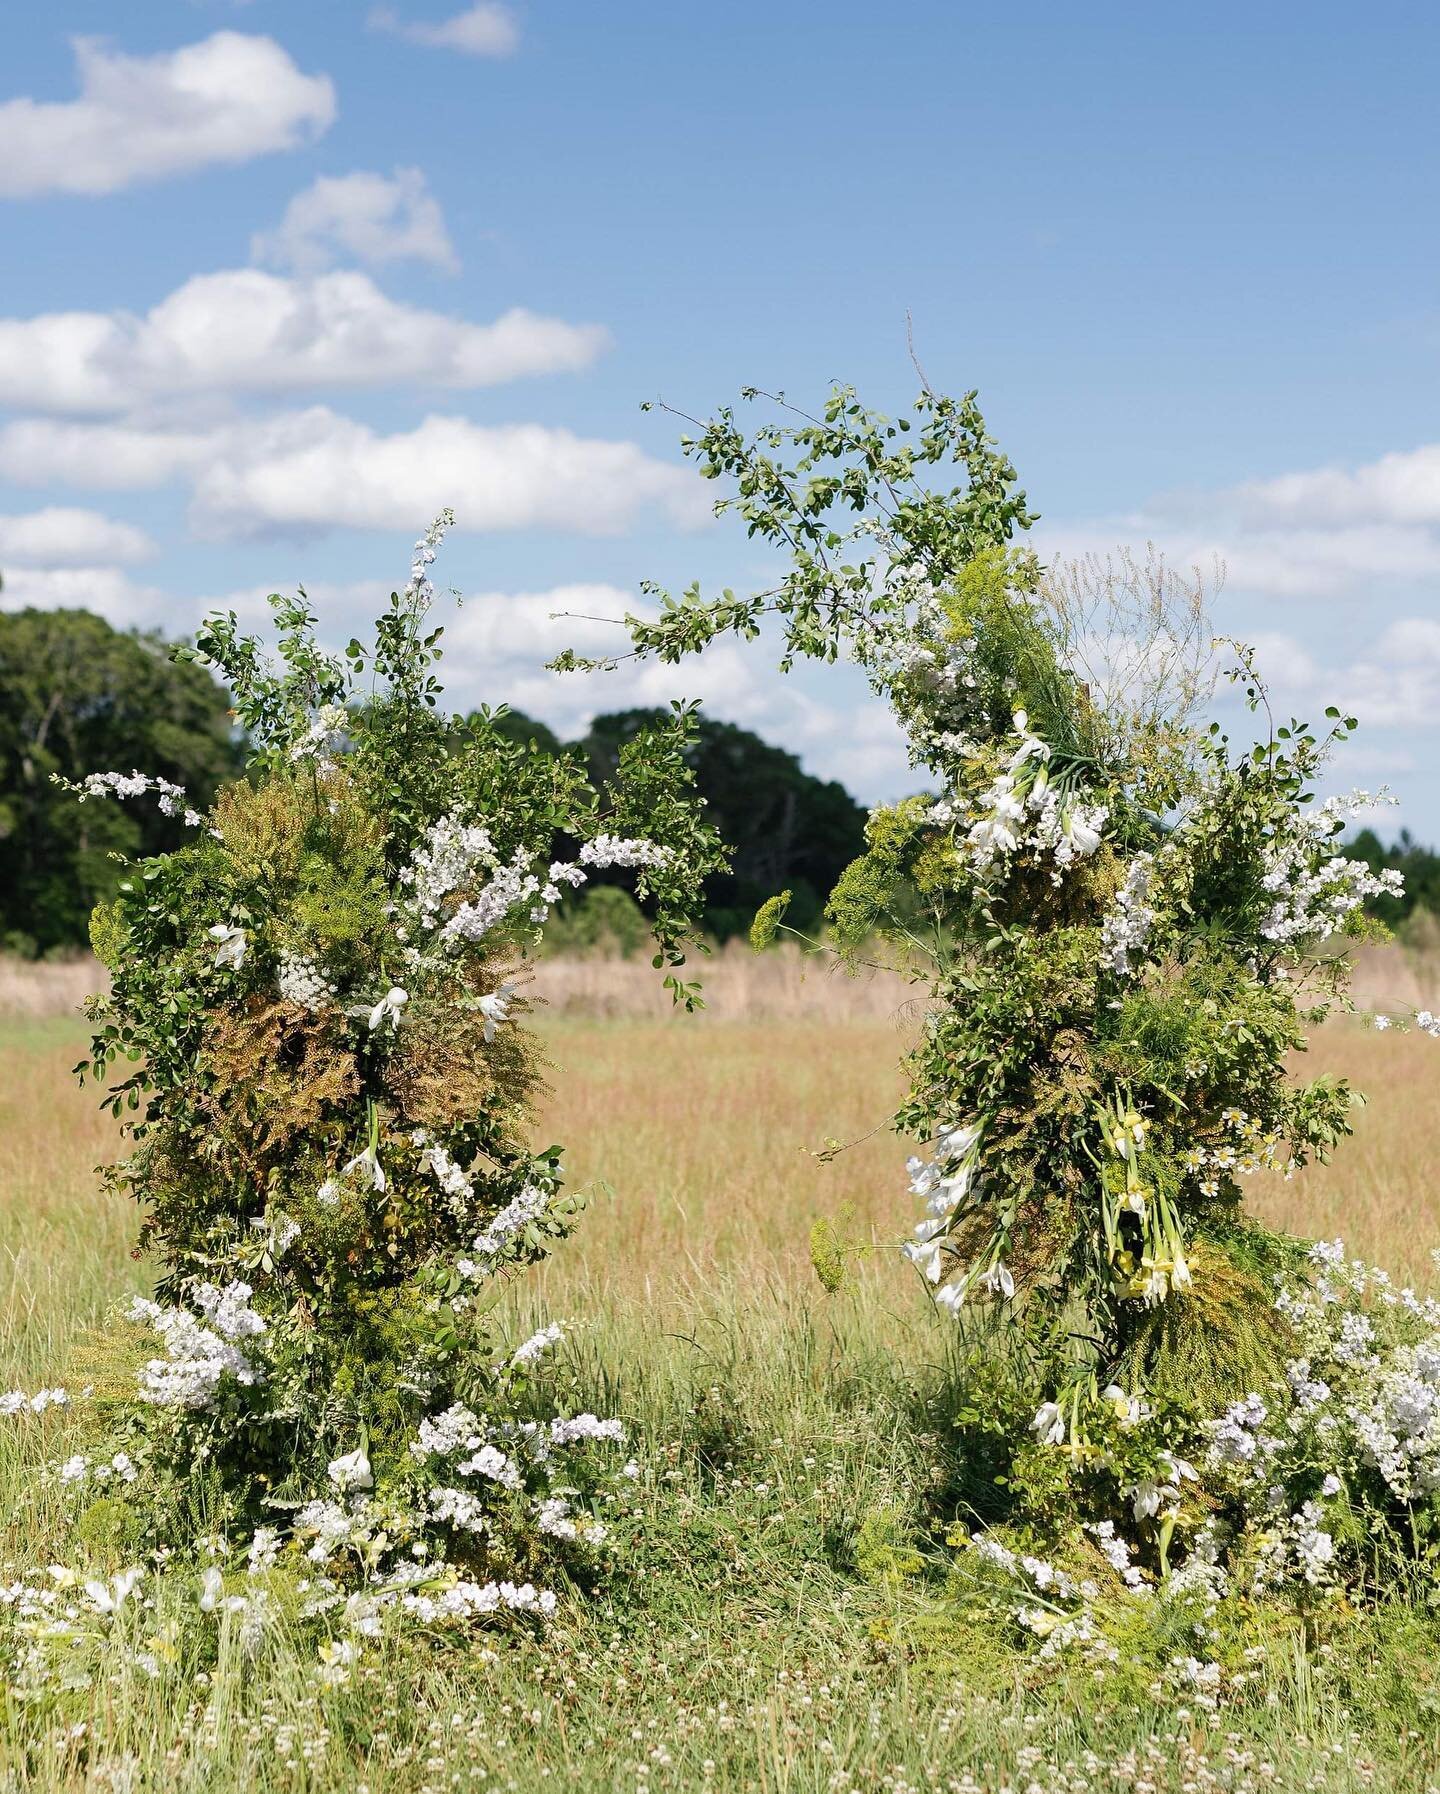 ethereal meadow arbor of my garden floral dreams. 

learned so much here this past spring, thank you @ironandclayflowers ✨

📷 @marstonphotography 

Loved creating this with
@thehouseofbb 
@eufloriaflowerco 
@sarahattherod 
@raisingorganicpeanuts 

?